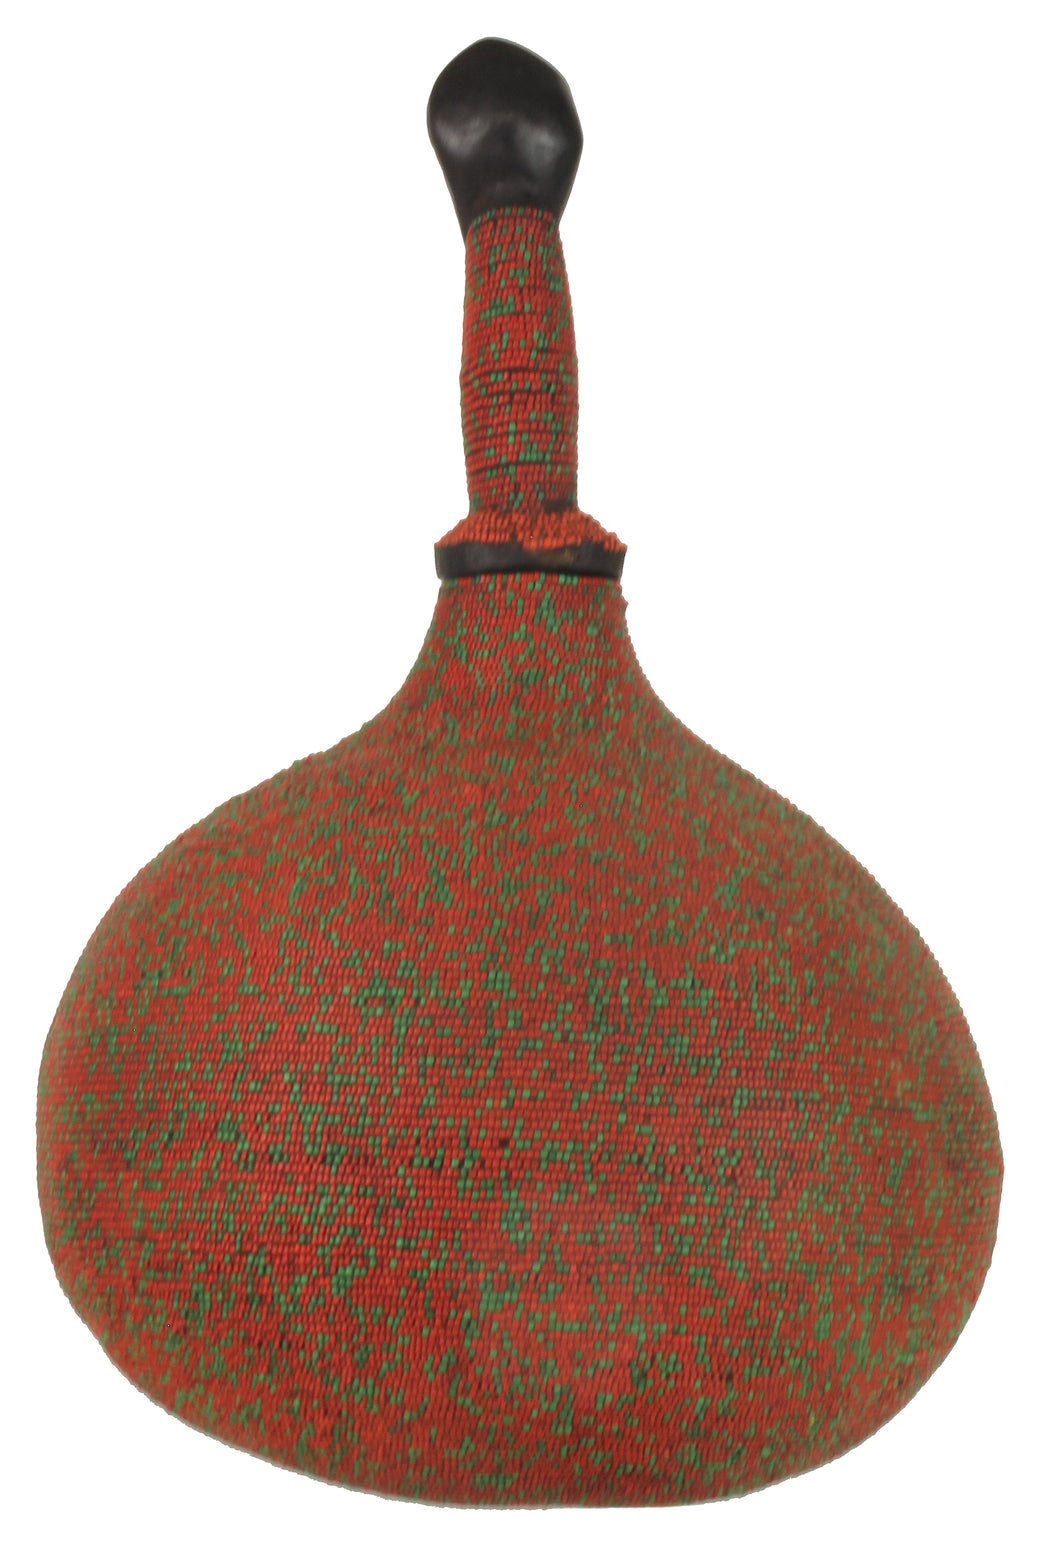 Beaded Decor Gourd from Congo, Africa - Red/Green - Niger Bend